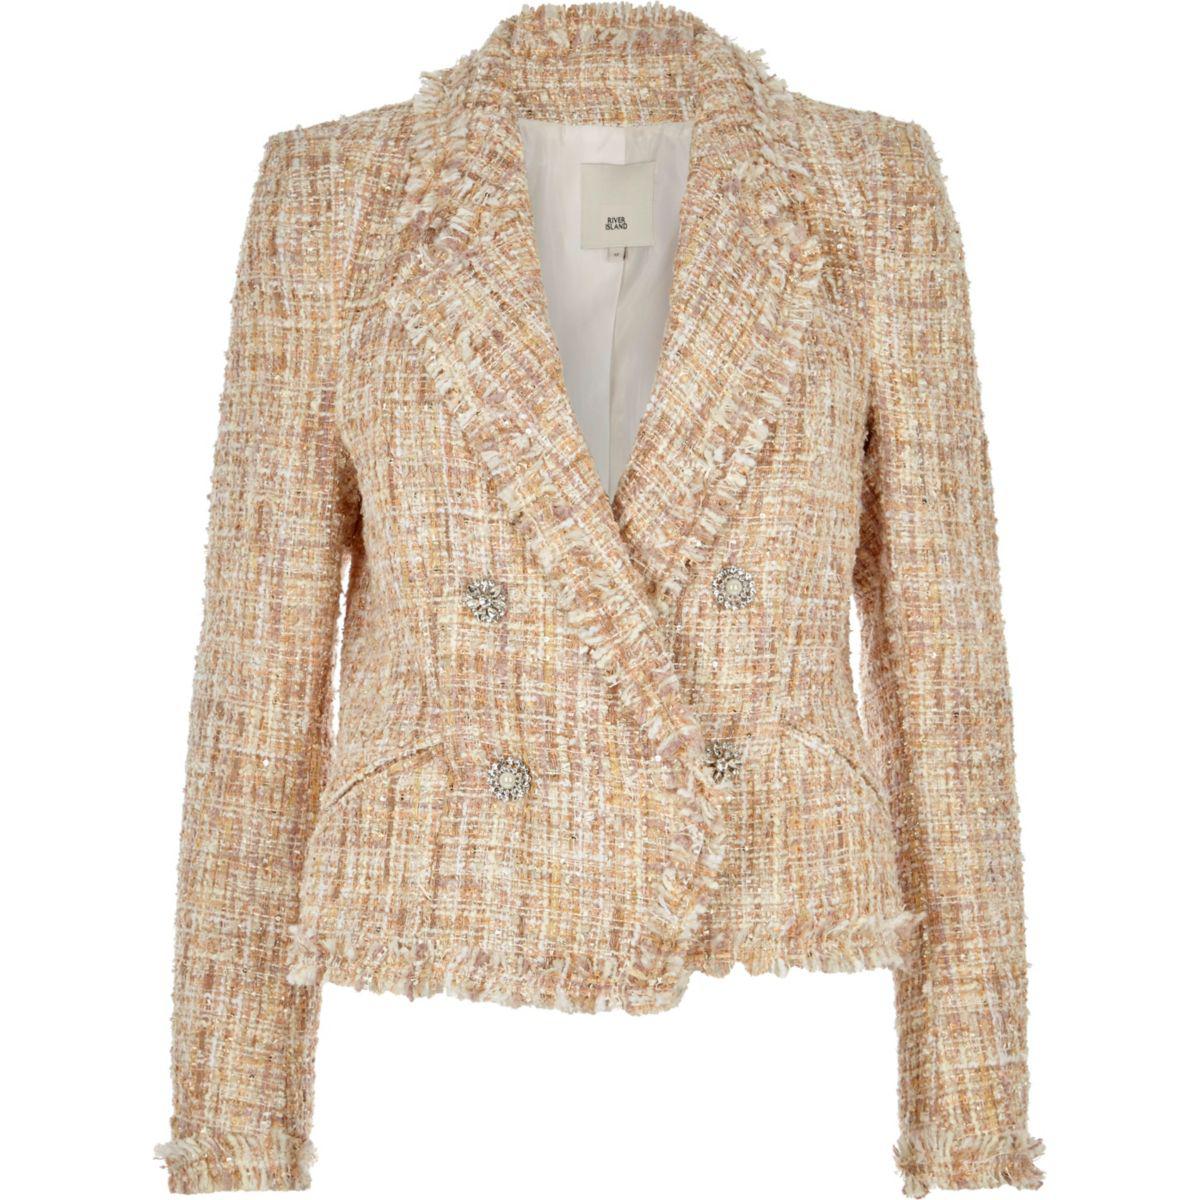 Lyst - River Island Cream Boucle Glitter Double-breasted Jacket Cream ...